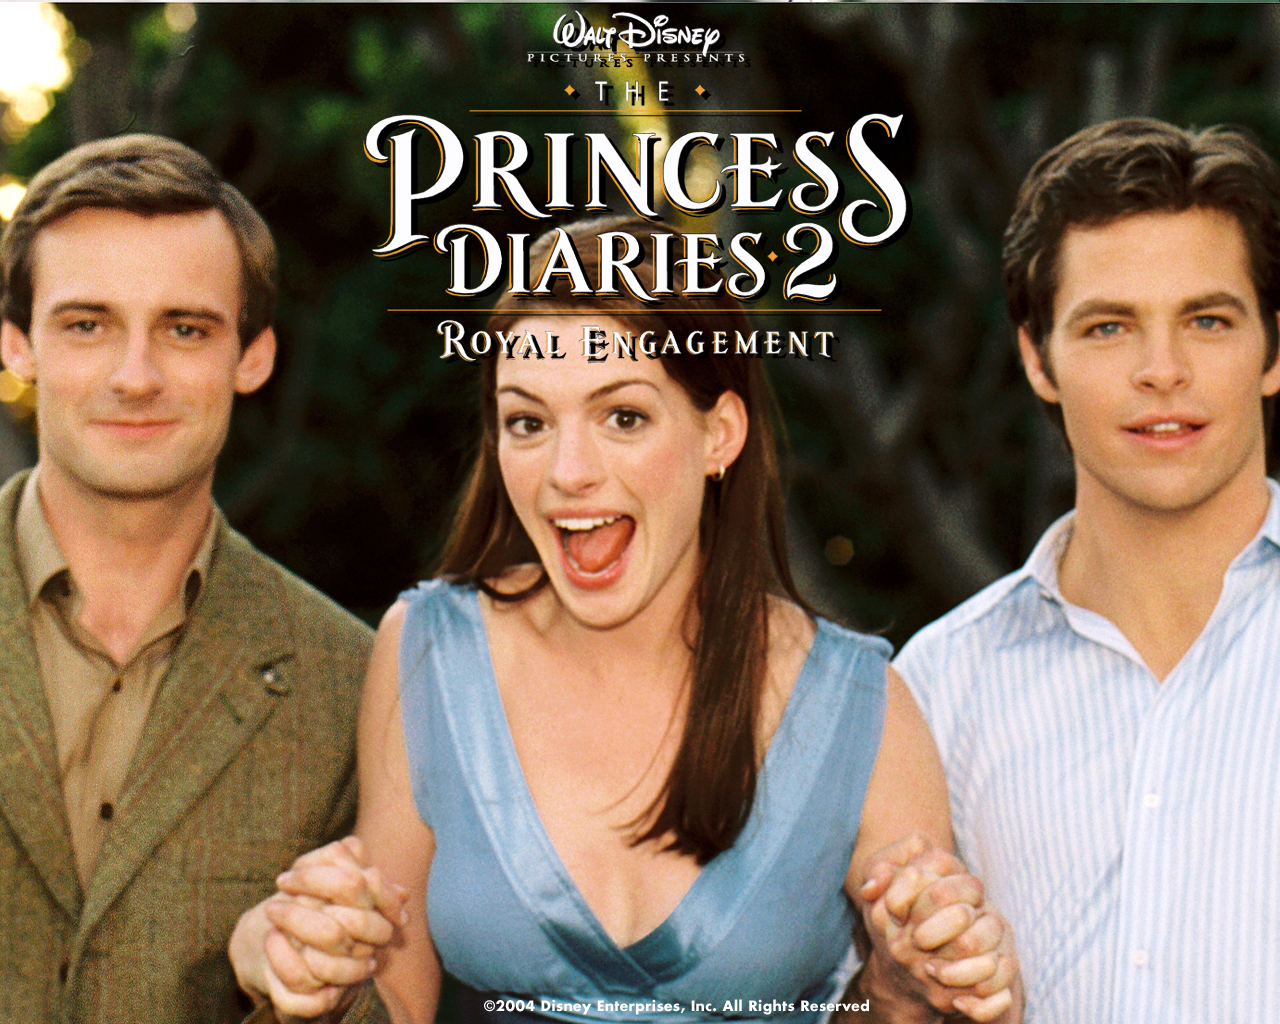 Anne Hathaway in The Princess Diaries 2- Royal Engagement Wallpaper 1280